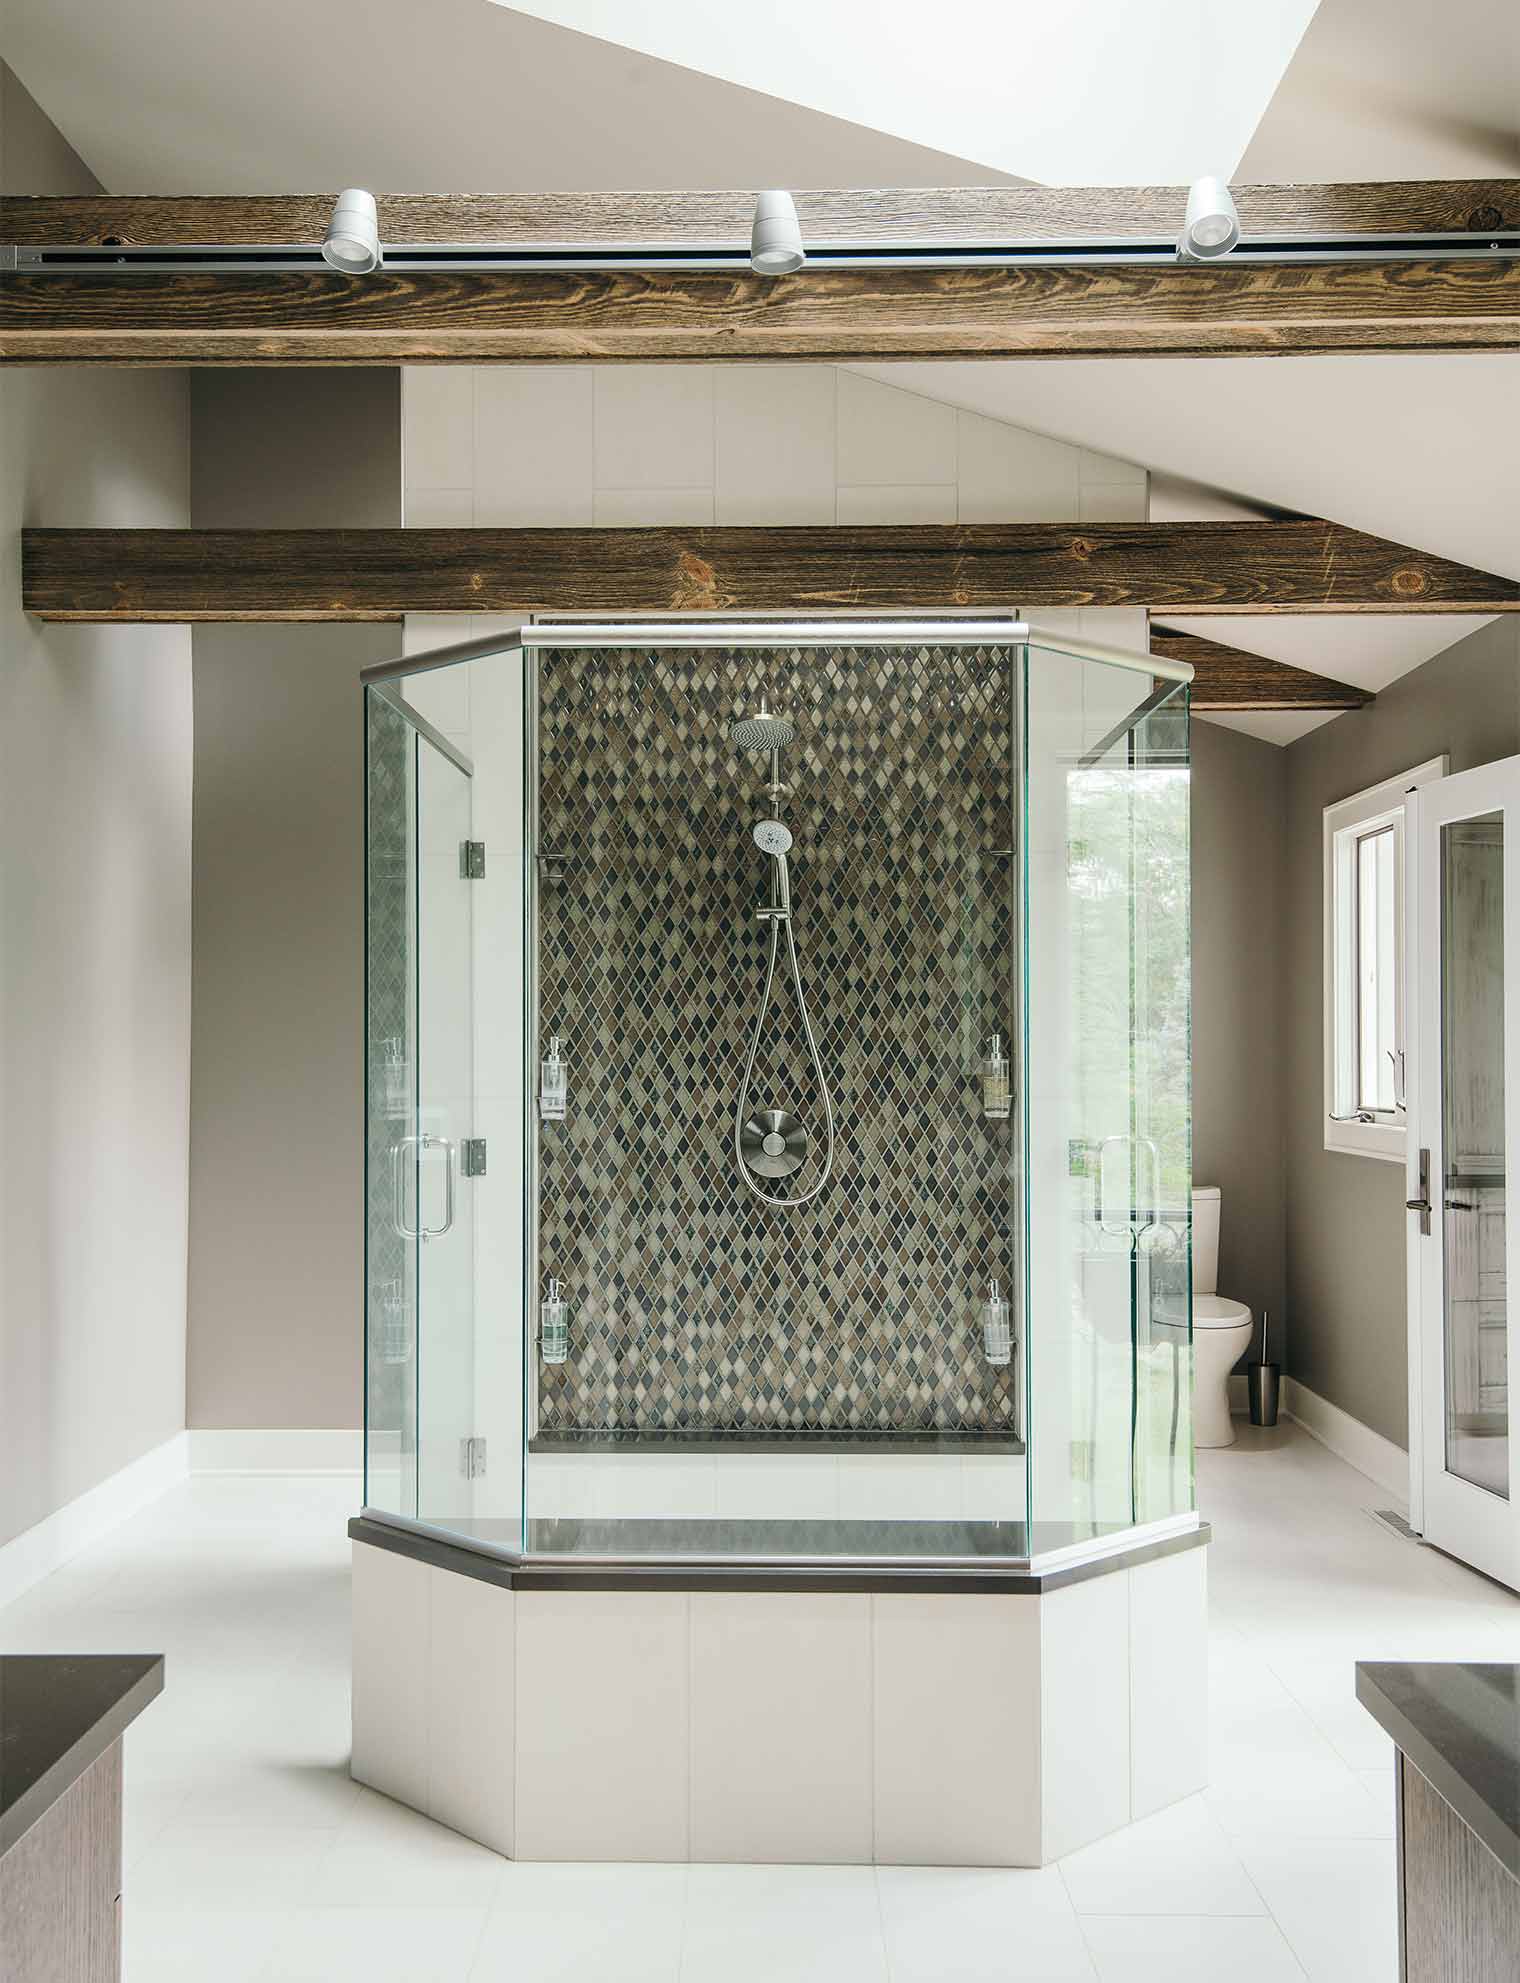 glass enclosed shower in center of master bathroom with two doors on each side, bench and diamond shaped tile by designer and remodeler Silent Rivers of Des Moines, Iowa